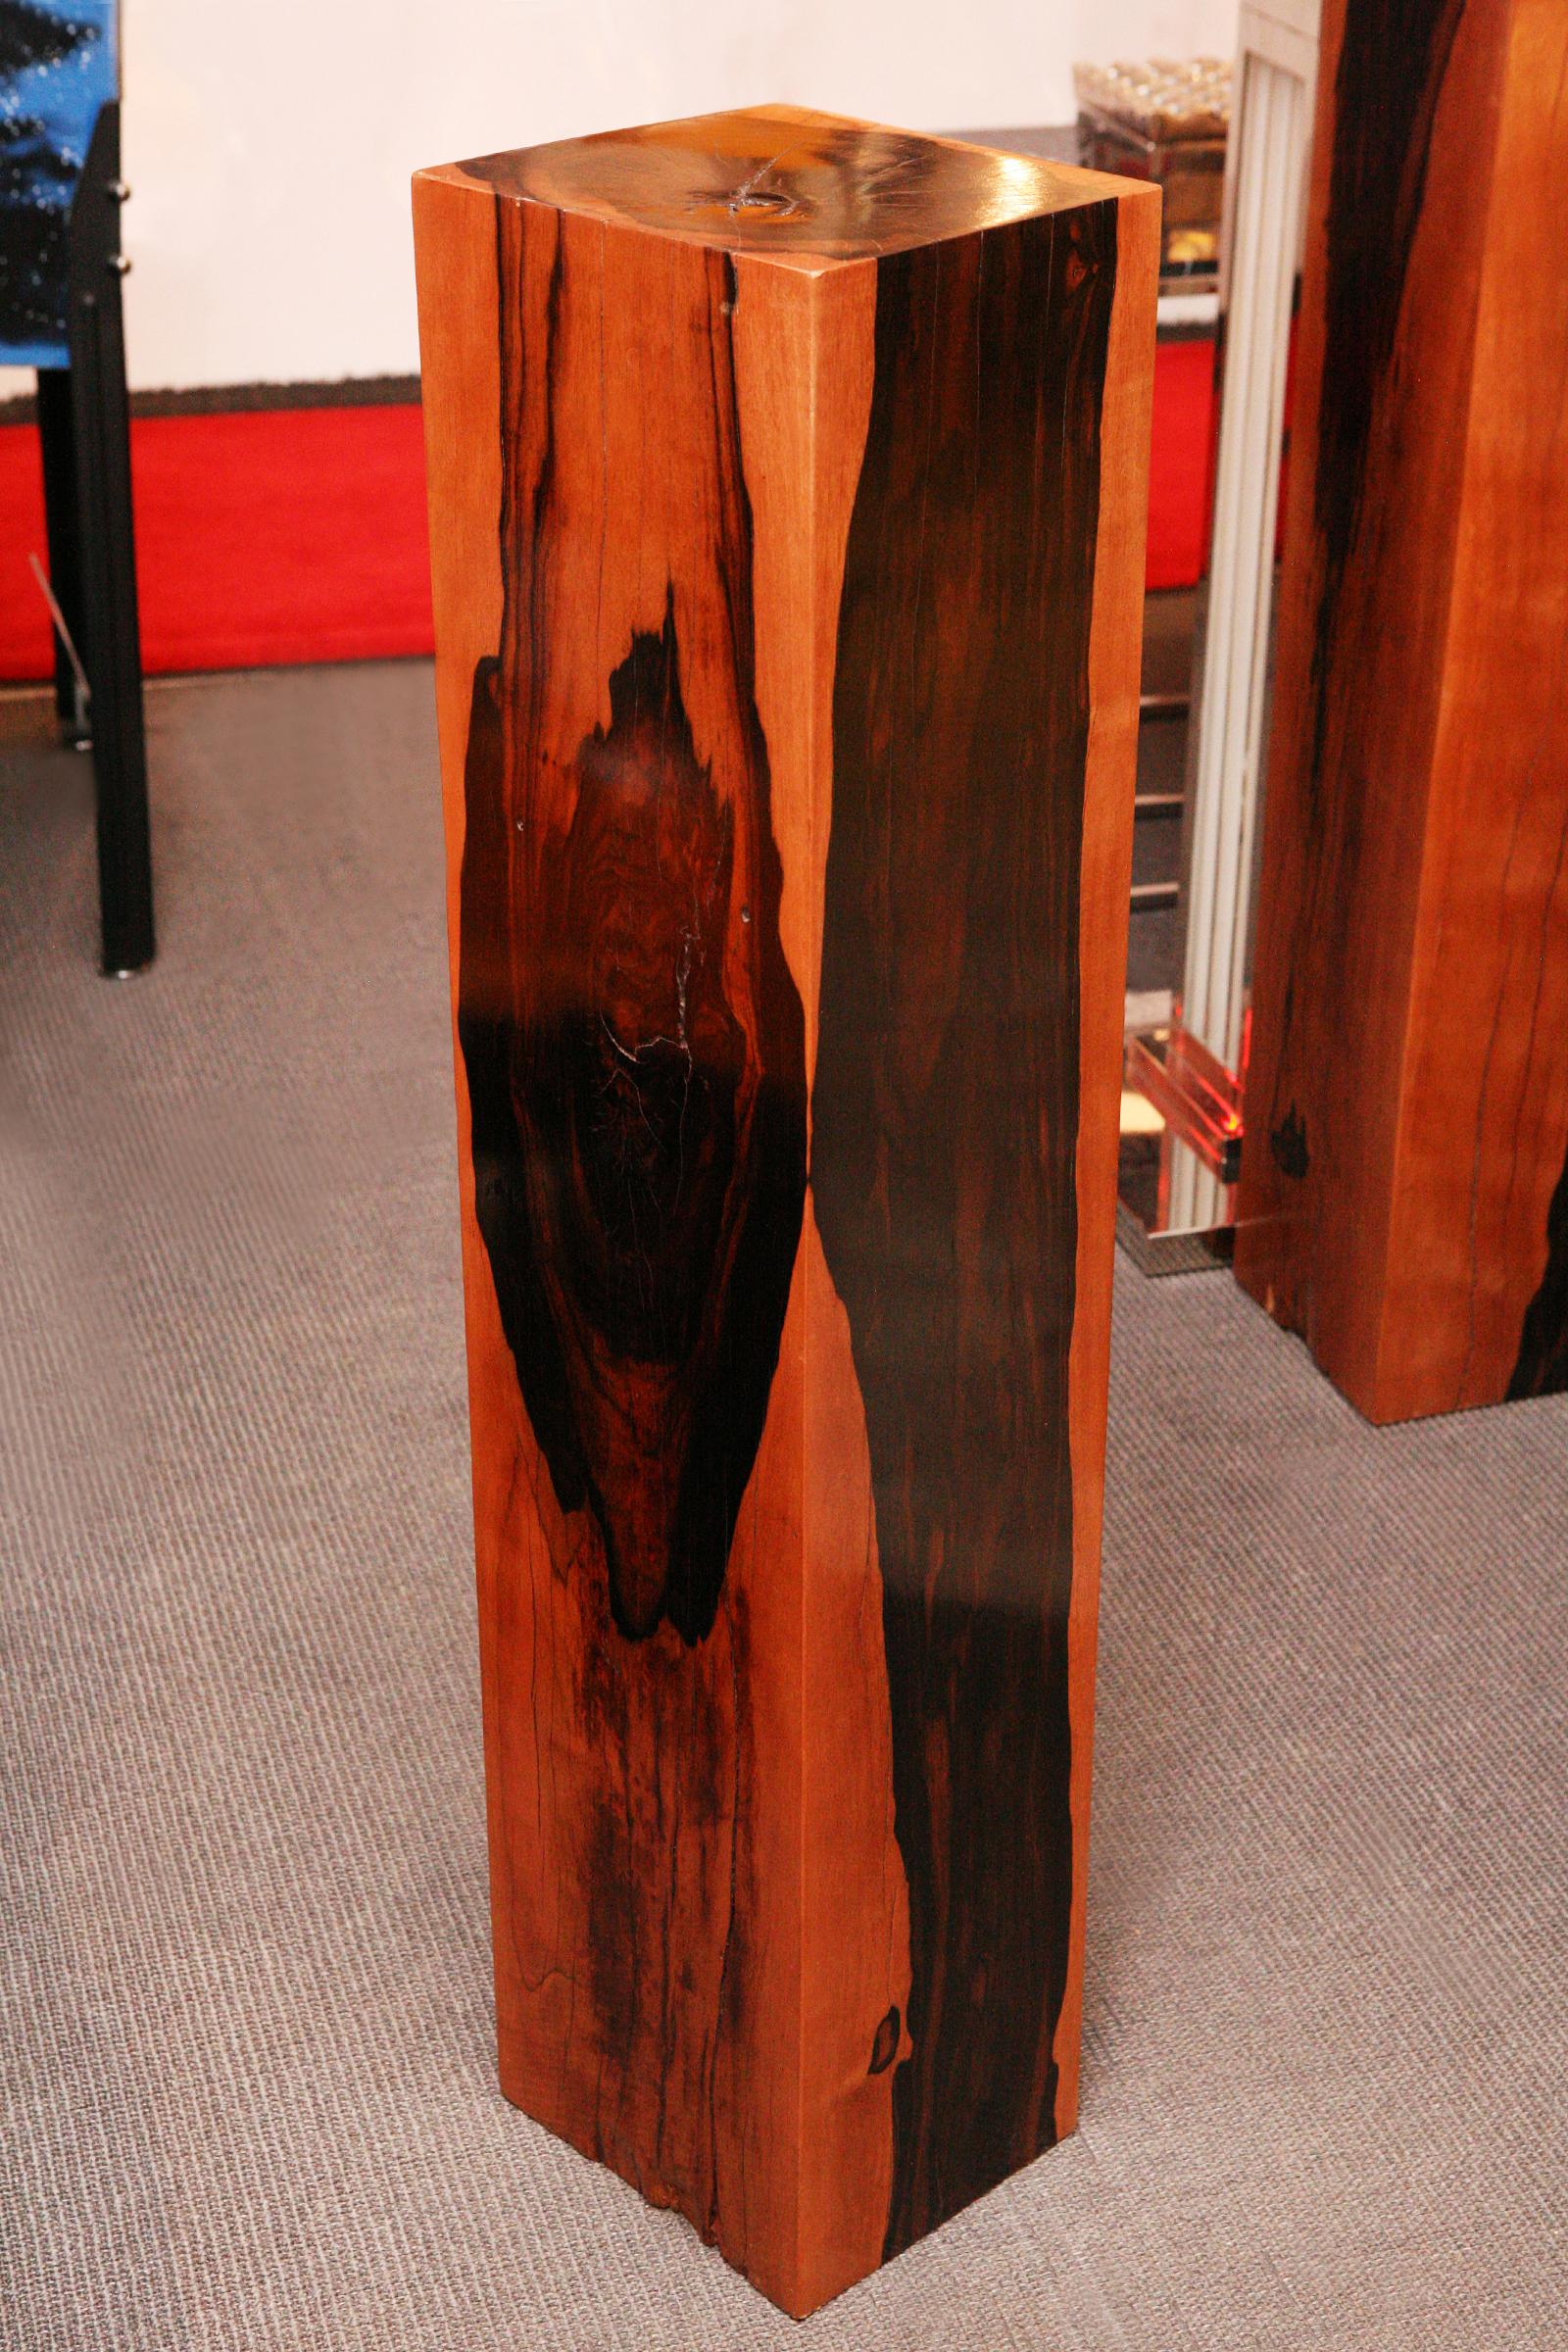 Column Solid Wood or pedestal in
solid polished and varnished wood.
Exceptional and unique piece.
 